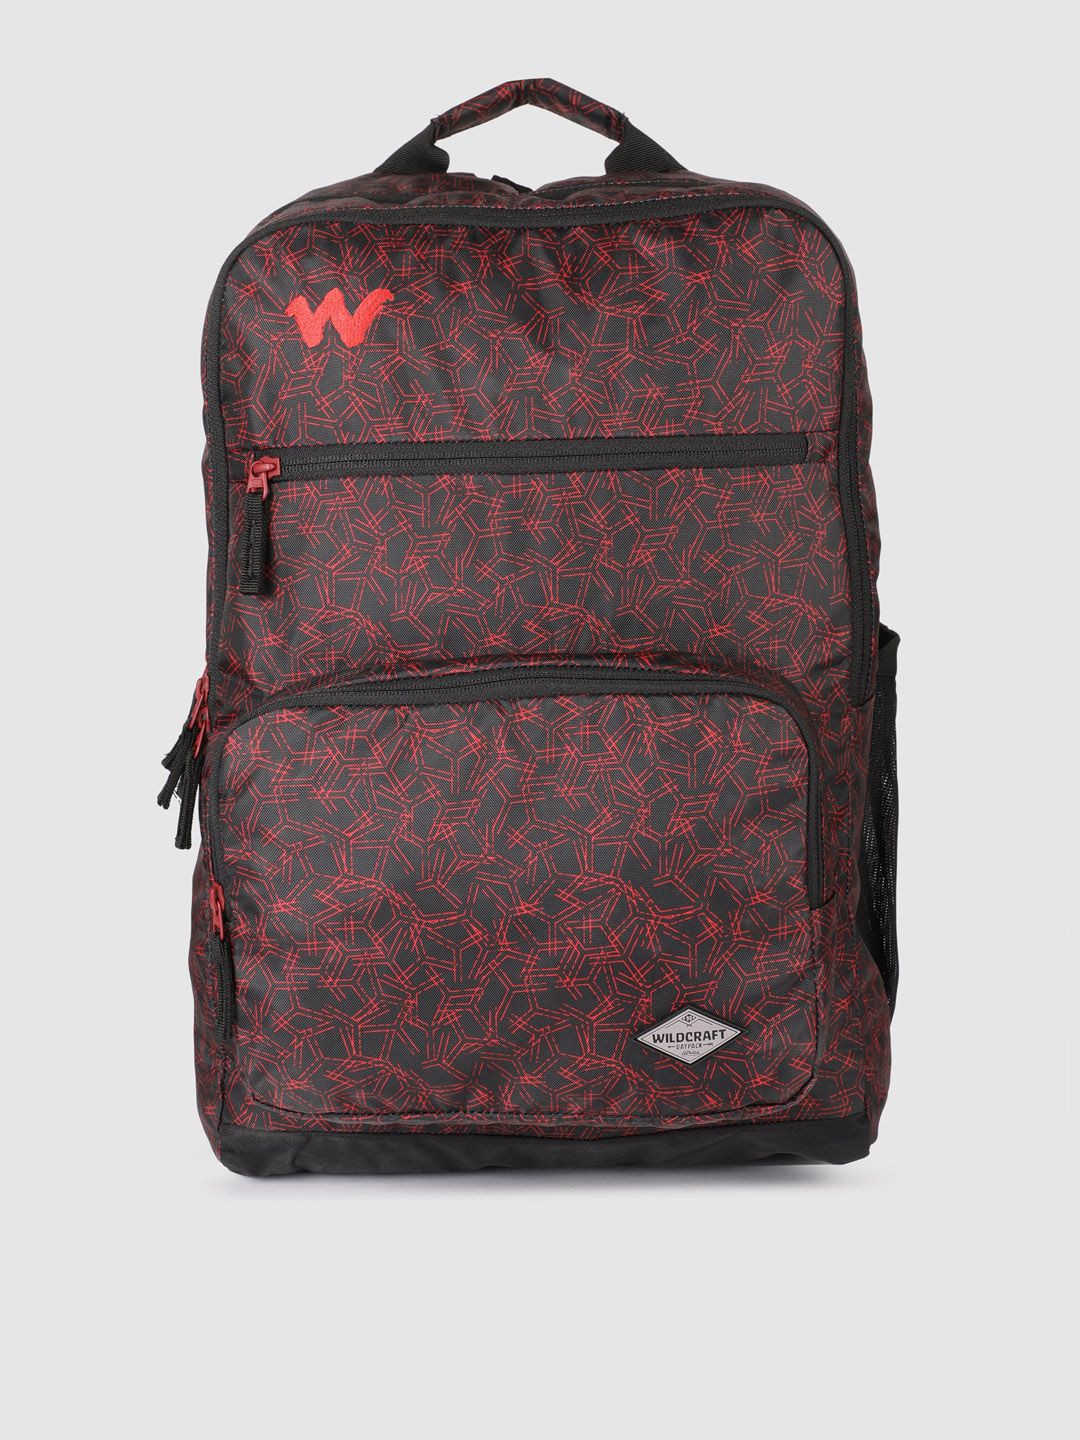 Wildcraft Unisex Red & Black Graphic Evo2 Spyker Backpack Price in India